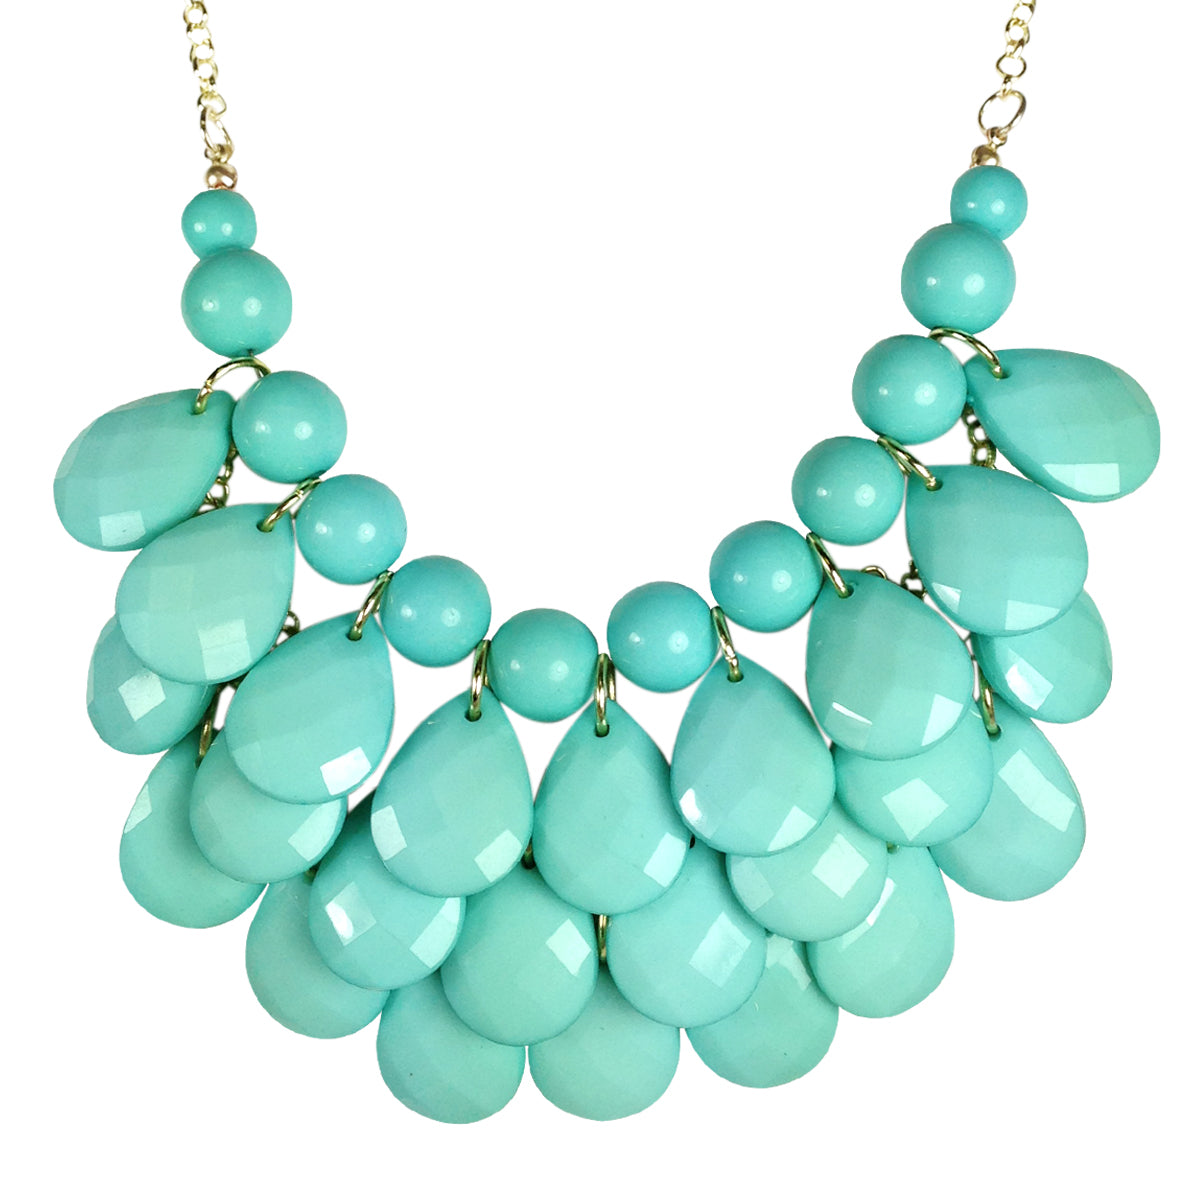 Wrapables Teardrop Bubble Bib Necklace and Earring Set